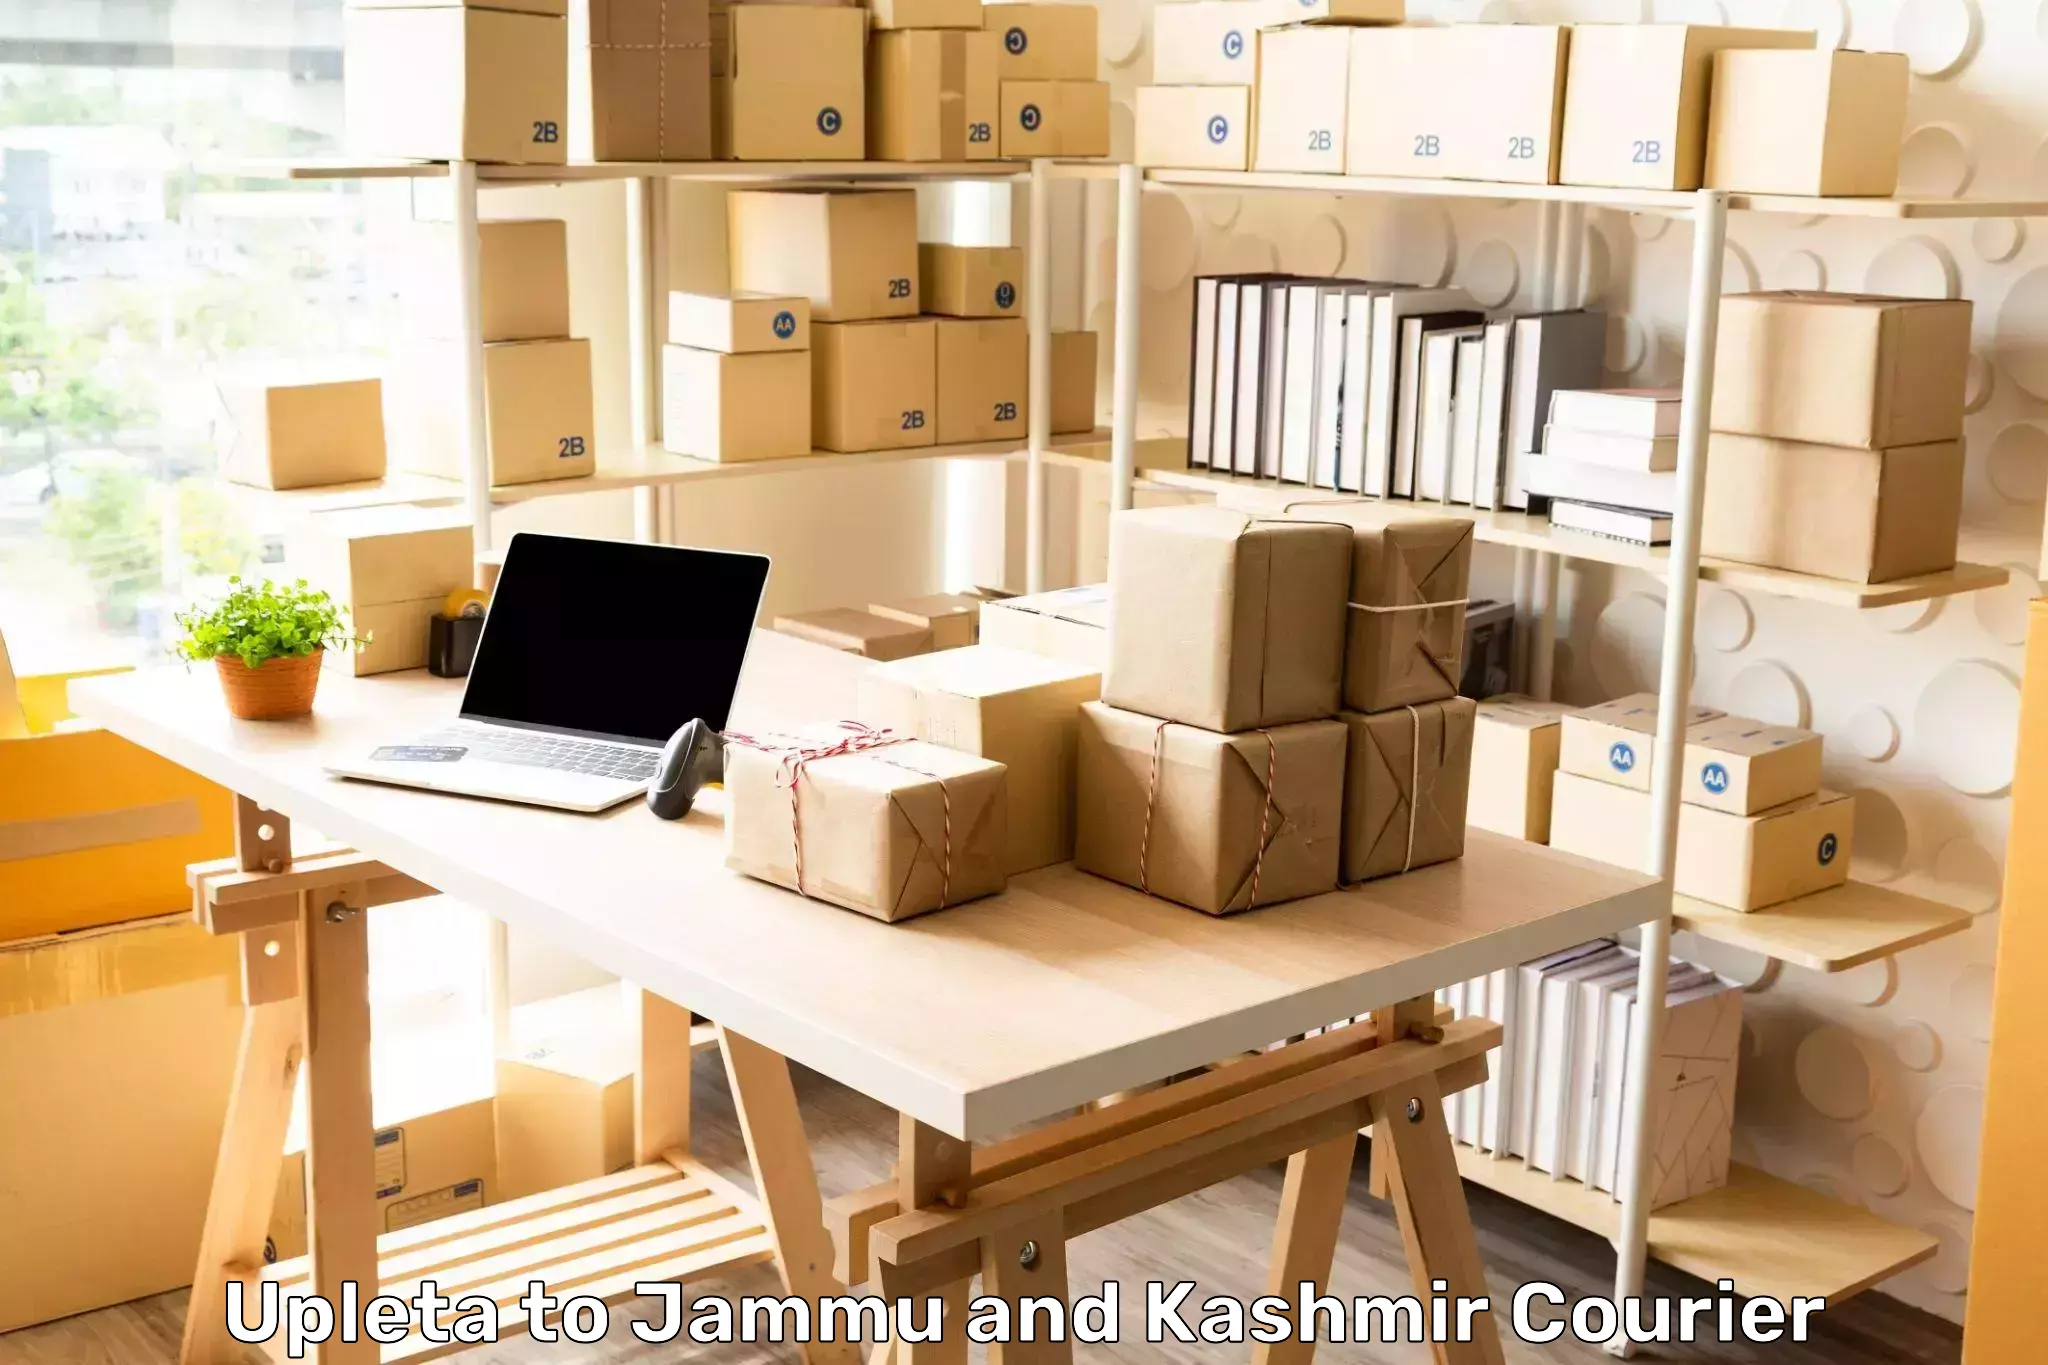 Reliable courier service Upleta to Baramulla